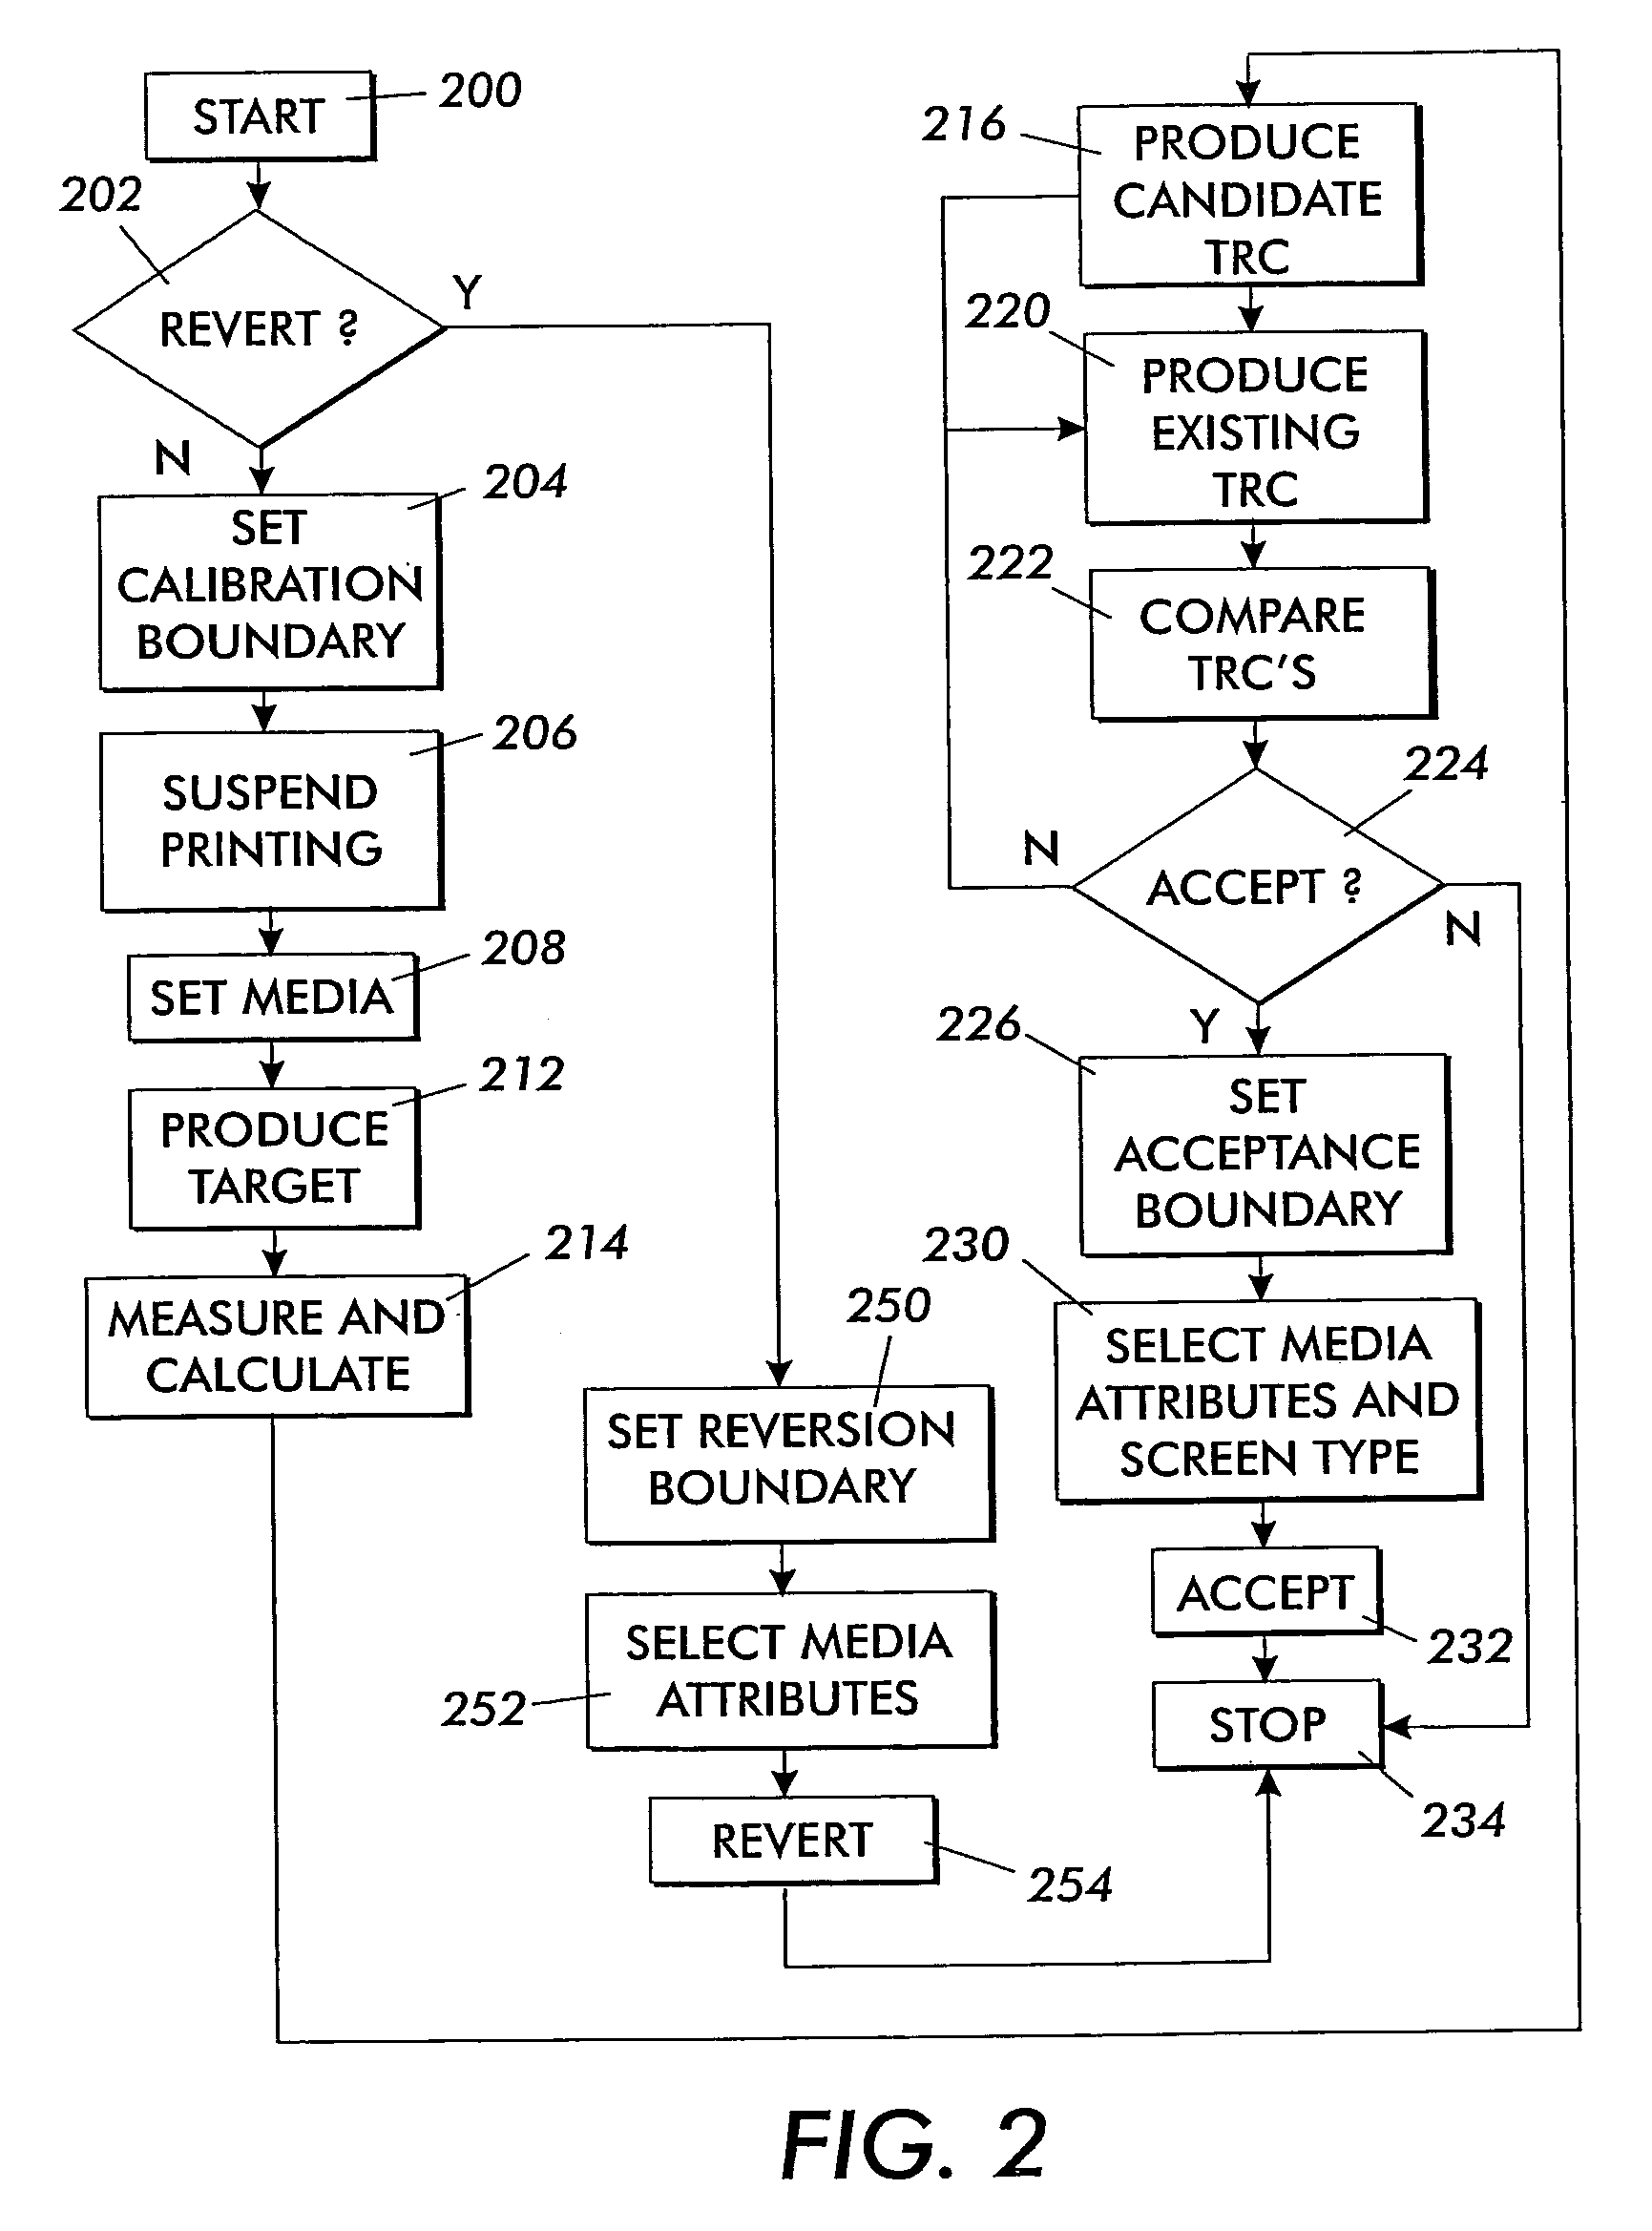 Increased temporal flexibility when performing/applying/reverting calibration for a printer output device